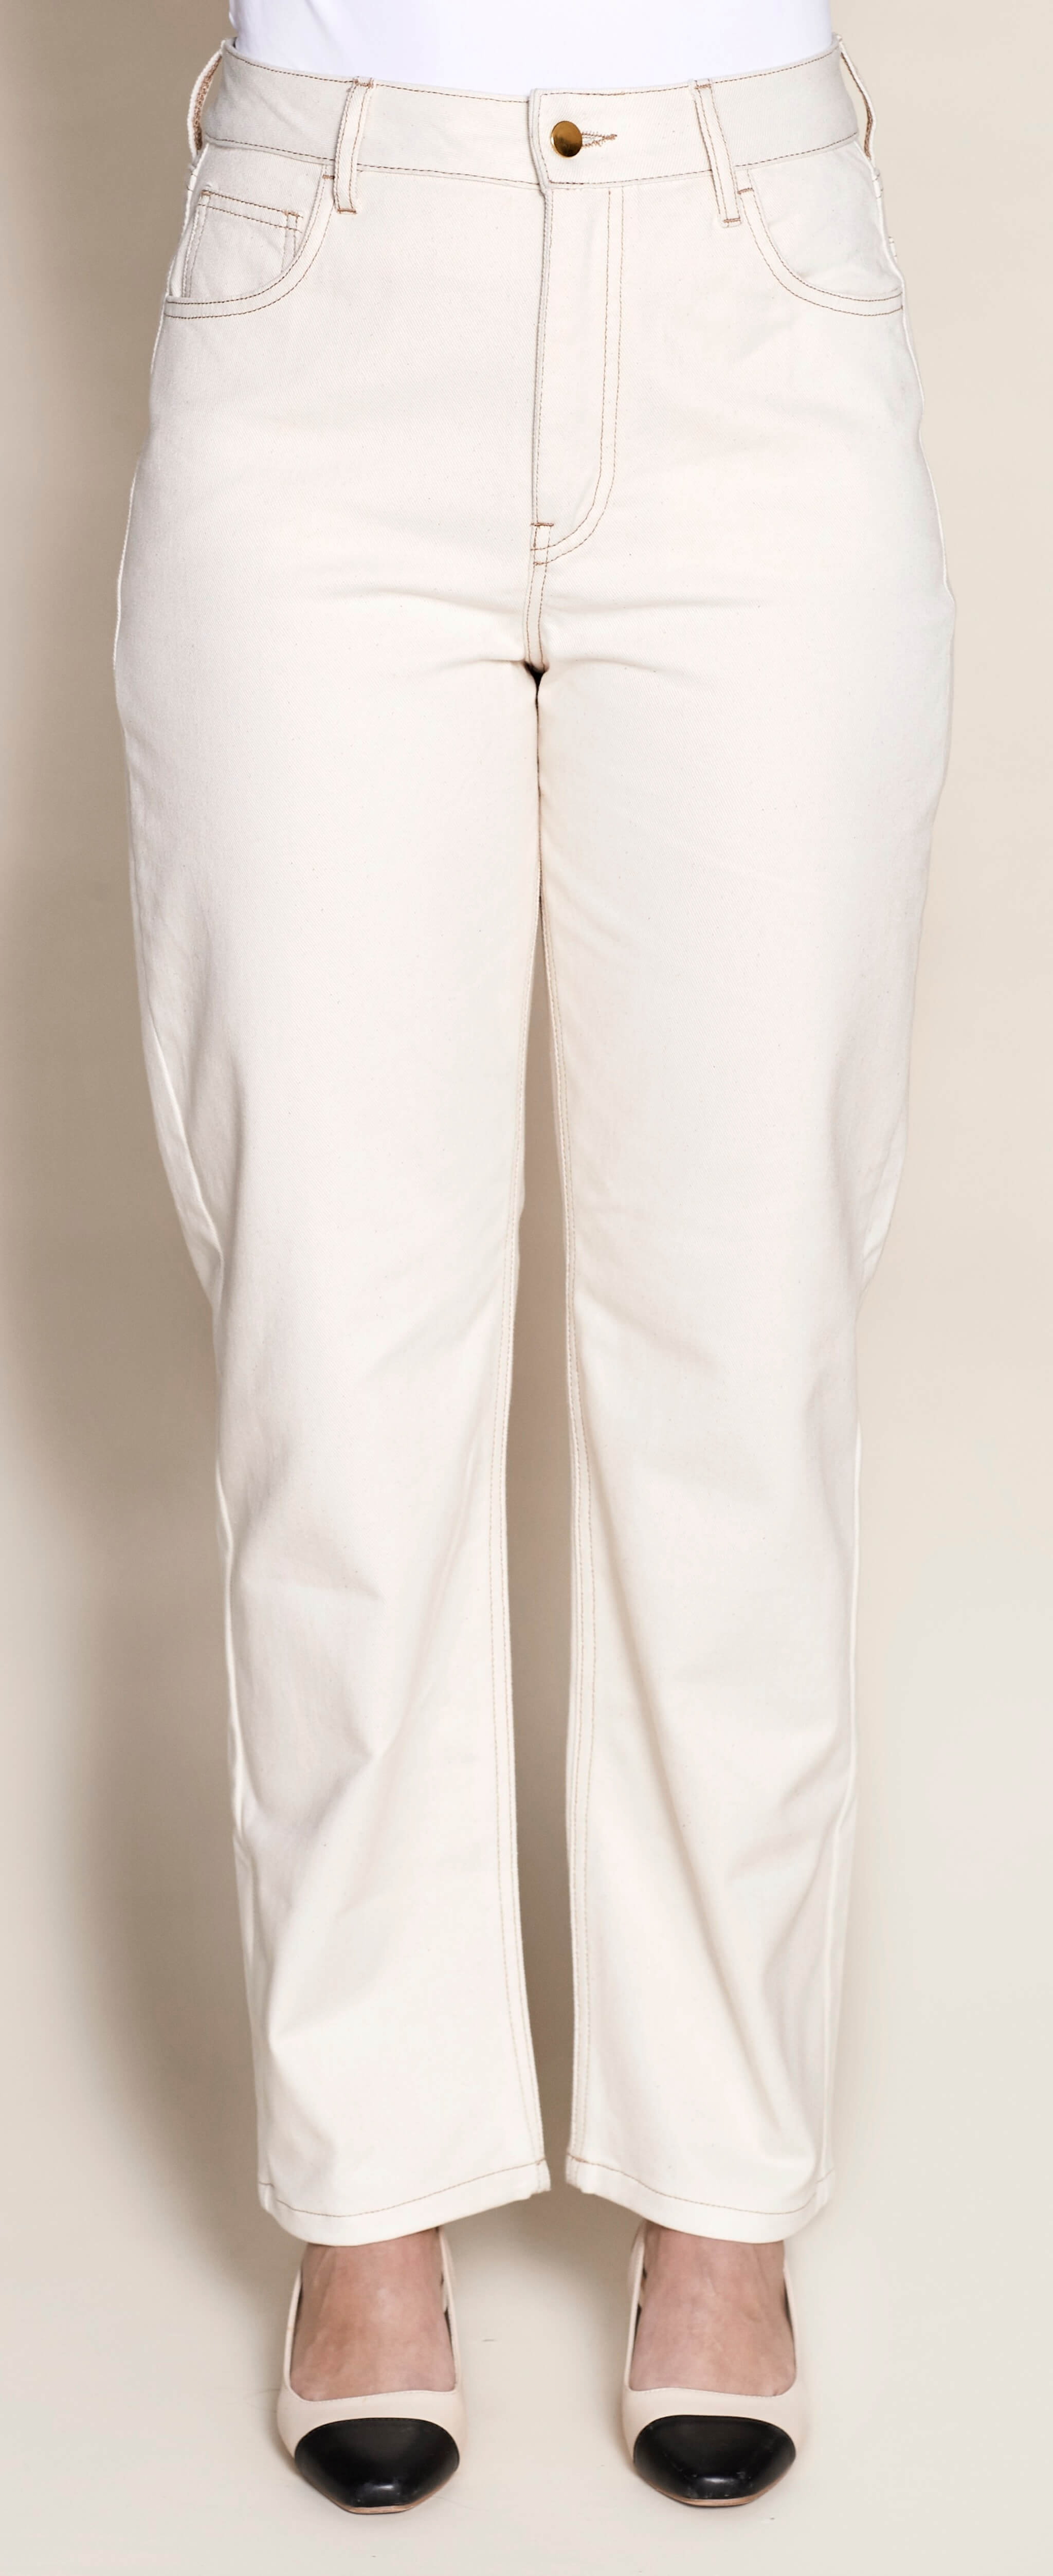 Front view of Cyme Copenhagen's classic cream denim trousers, showcasing the sophisticated cut and sustainable quality materials characteristic of the Danish designer fashion brand.